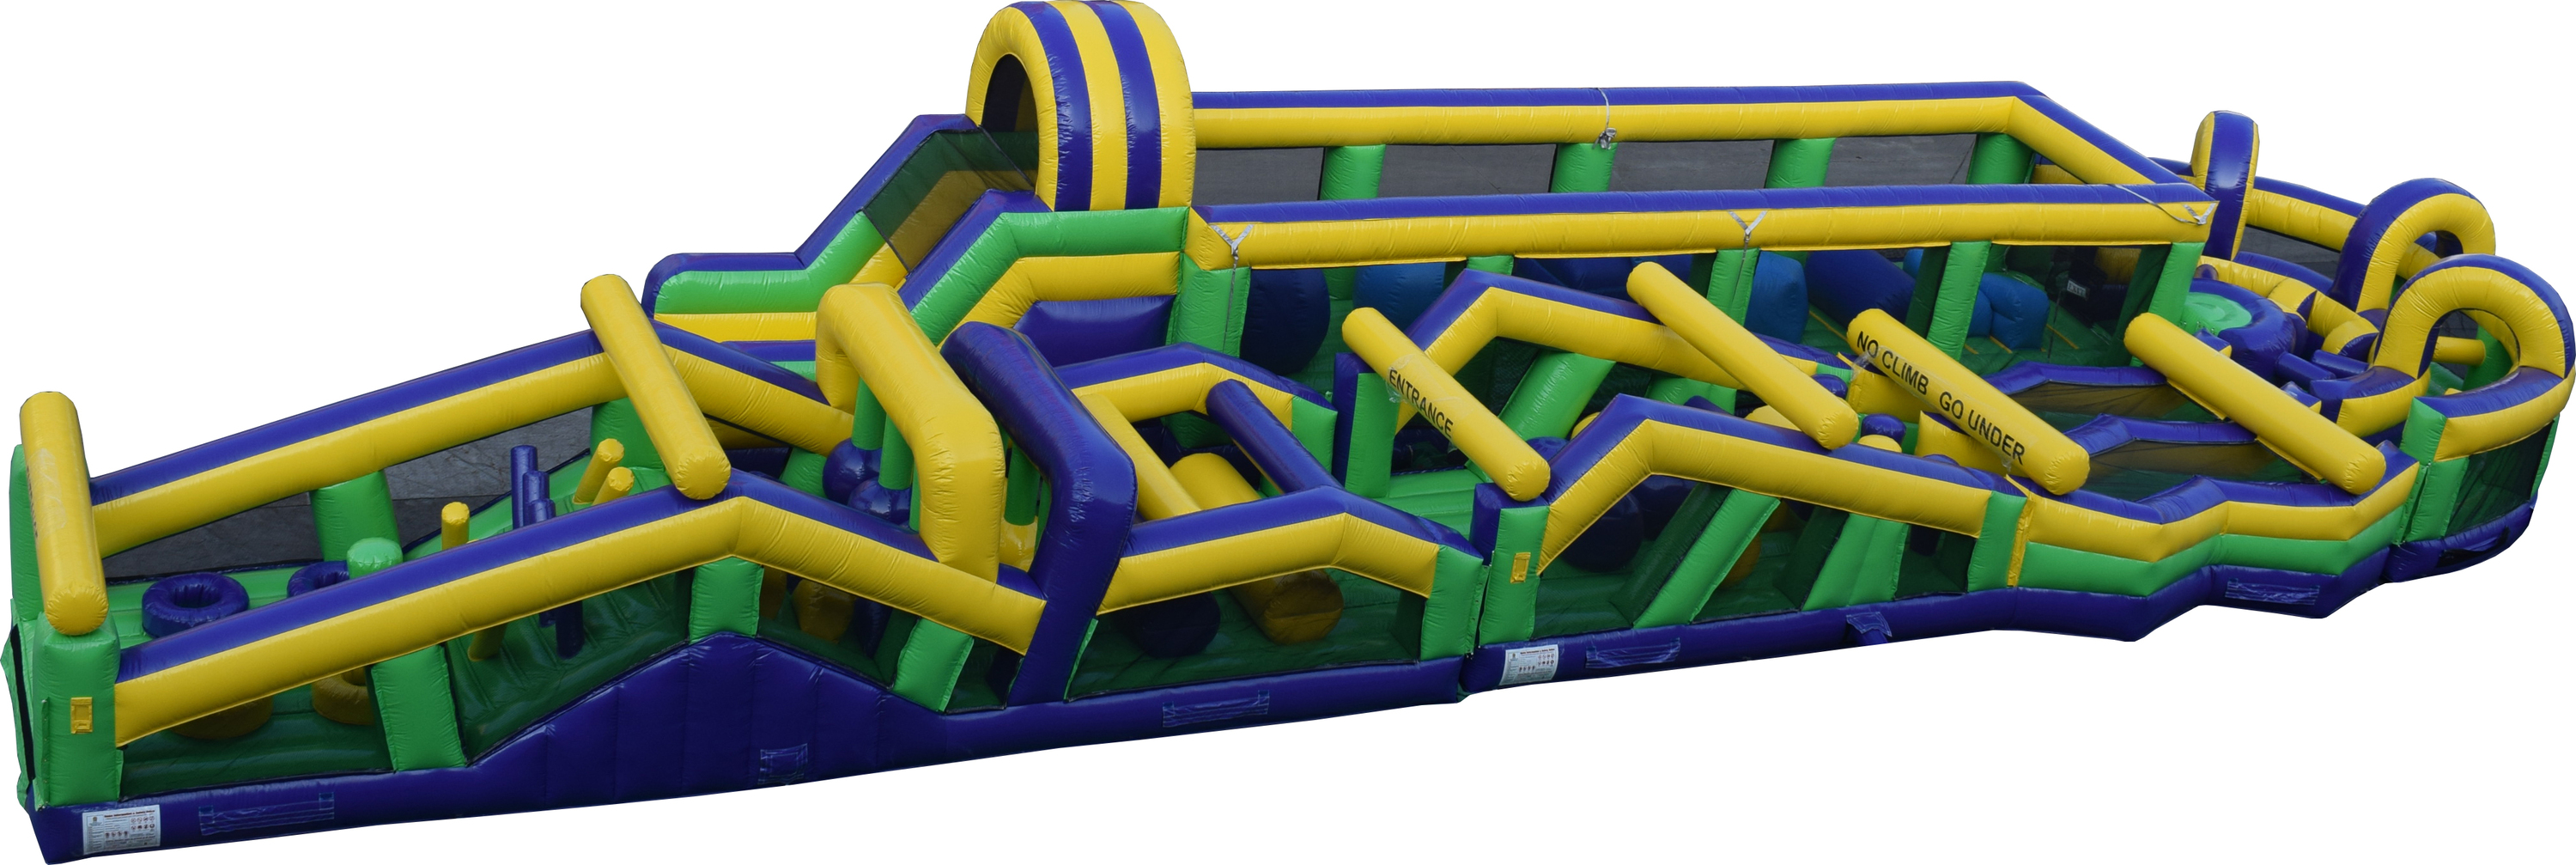 Georgetown Inflatable Obstacles